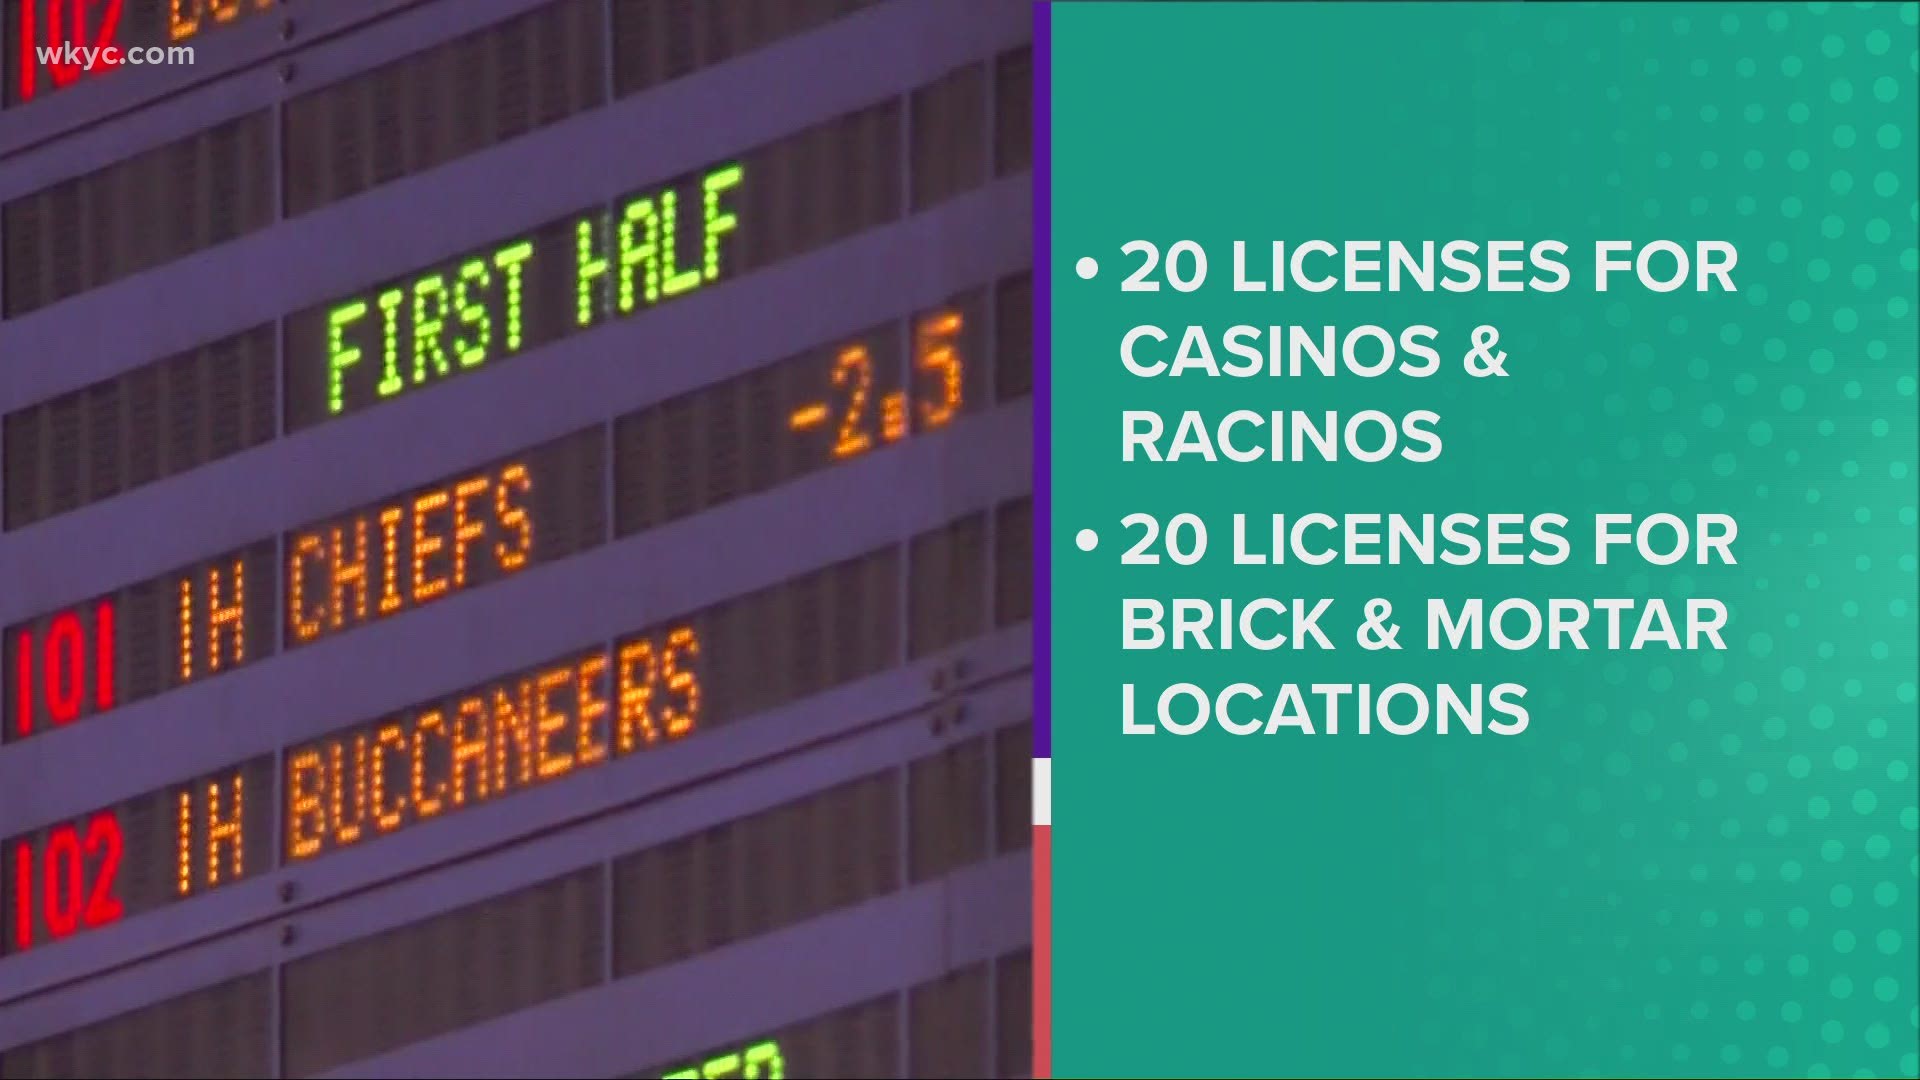 The bill would legalize sports gambling in the state this year.